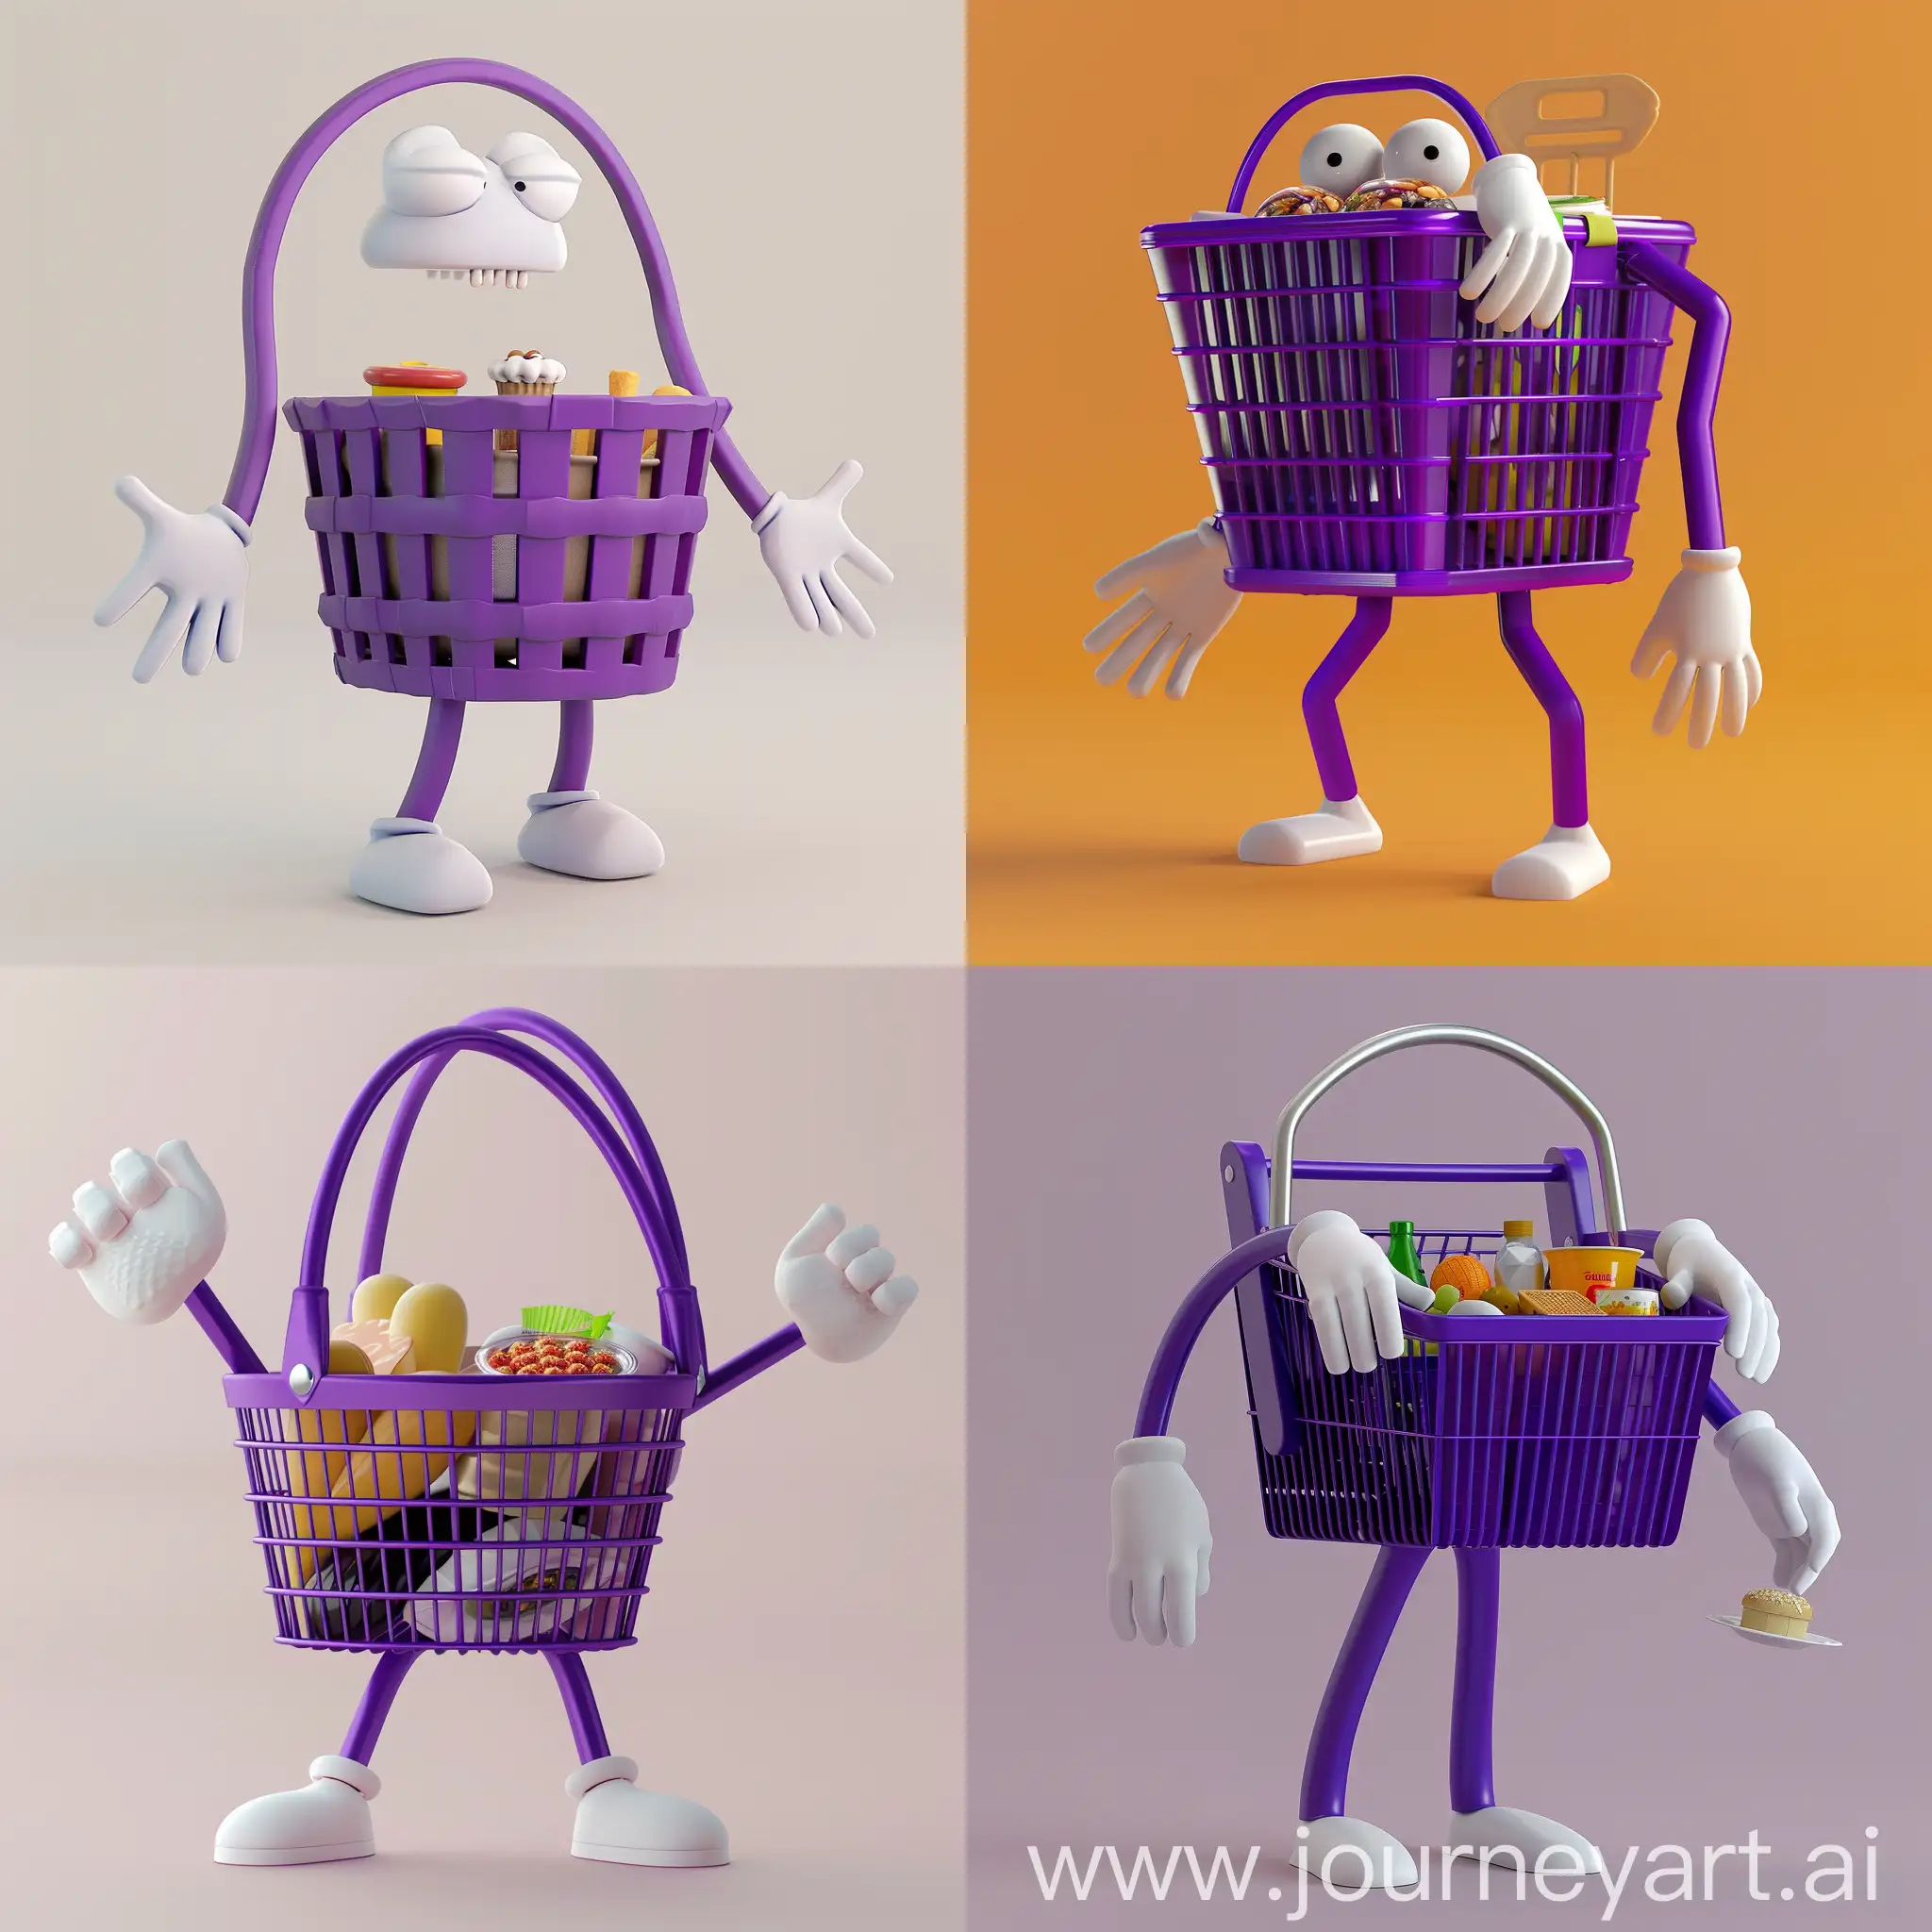 Purple-3D-Batam-Shopping-Basket-with-Arms-Legs-White-Gloves-and-Food-Inside